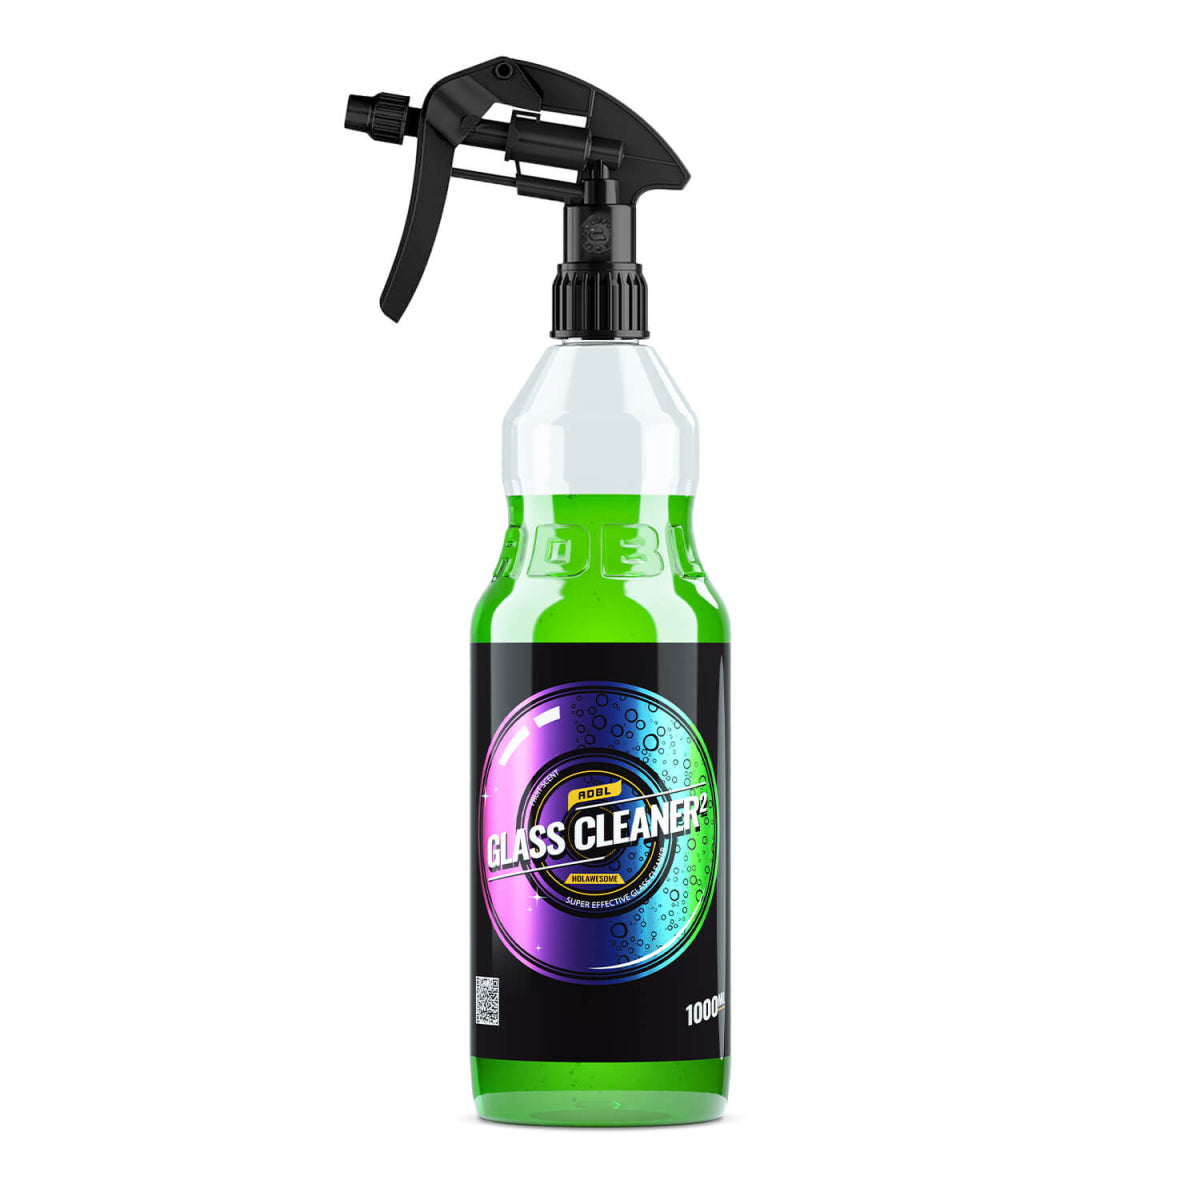 ADBL HOLAWESOME Glass Cleaner 2 Glasreiniger mit Canyon Trigger 1L-  9179